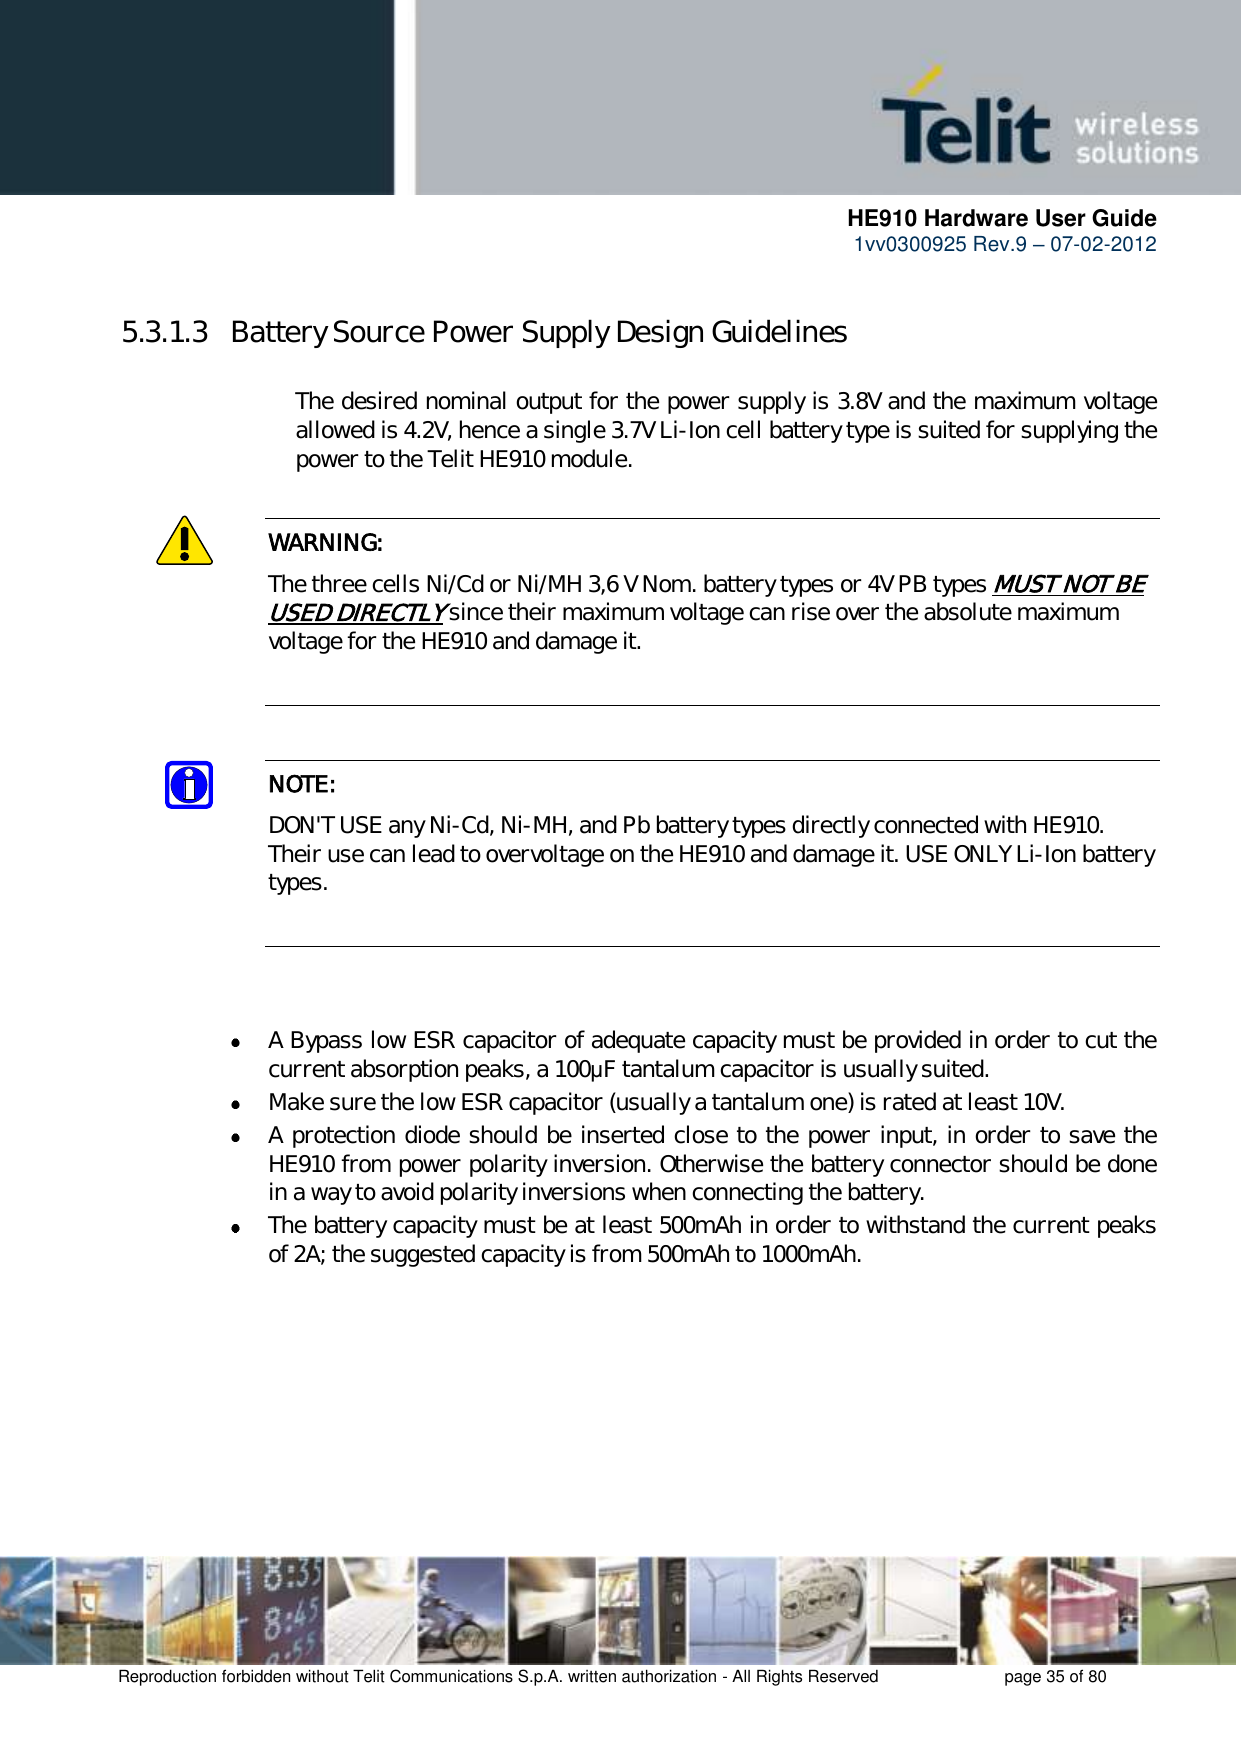      HE910 Hardware User Guide 1vv0300925 Rev.9 – 07-02-2012    Reproduction forbidden without Telit Communications S.p.A. written authorization - All Rights Reserved    page 35 of 80   5.3.1.3  Battery Source Power Supply Design Guidelines        The desired nominal output for the power supply is 3.8V and the maximum voltage     allowed is 4.2V, hence a single 3.7V Li-Ion cell battery type is suited for supplying the     power to the Telit HE910 module.  WARNING: The three cells Ni/Cd or Ni/MH 3,6 V Nom. battery types or 4V PB types MUST NOT BE USED DIRECTLY since their maximum voltage can rise over the absolute maximum voltage for the HE910 and damage it.   NOTE: DON&apos;T USE any Ni-Cd, Ni-MH, and Pb battery types directly connected with HE910. Their use can lead to overvoltage on the HE910 and damage it. USE ONLY Li-Ion battery types.     A Bypass low ESR capacitor of adequate capacity must be provided in order to cut the current absorption peaks, a 100μF tantalum capacitor is usually suited.  Make sure the low ESR capacitor (usually a tantalum one) is rated at least 10V.  A protection diode should be inserted close to the power input, in order to save the HE910 from power polarity inversion. Otherwise the battery connector should be done in a way to avoid polarity inversions when connecting the battery.  The battery capacity must be at least 500mAh in order to withstand the current peaks of 2A; the suggested capacity is from 500mAh to 1000mAh. 